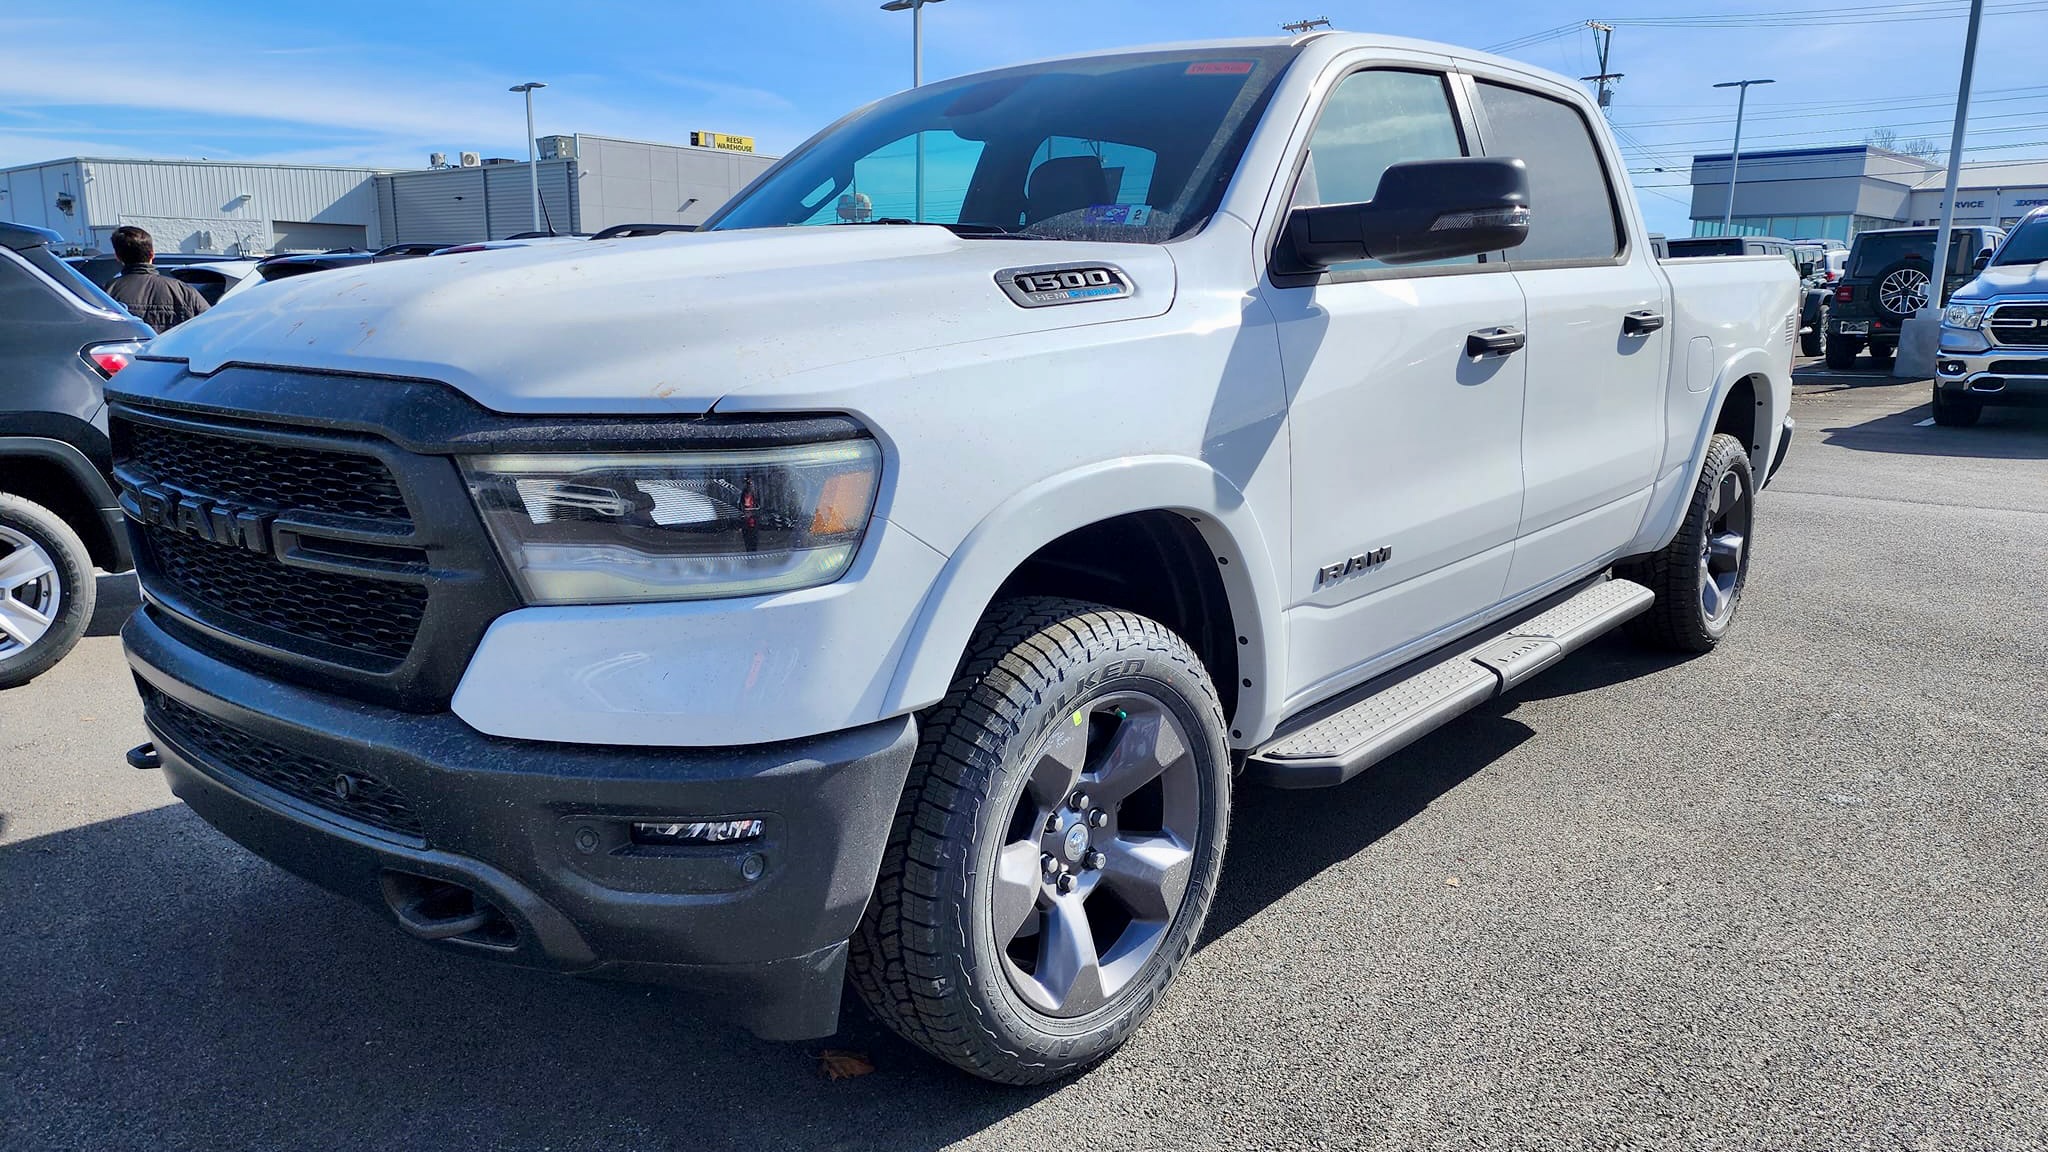 FIRST ON SCENE: 2023 Ram 1500 'Built To Serve' EMS Edition Has